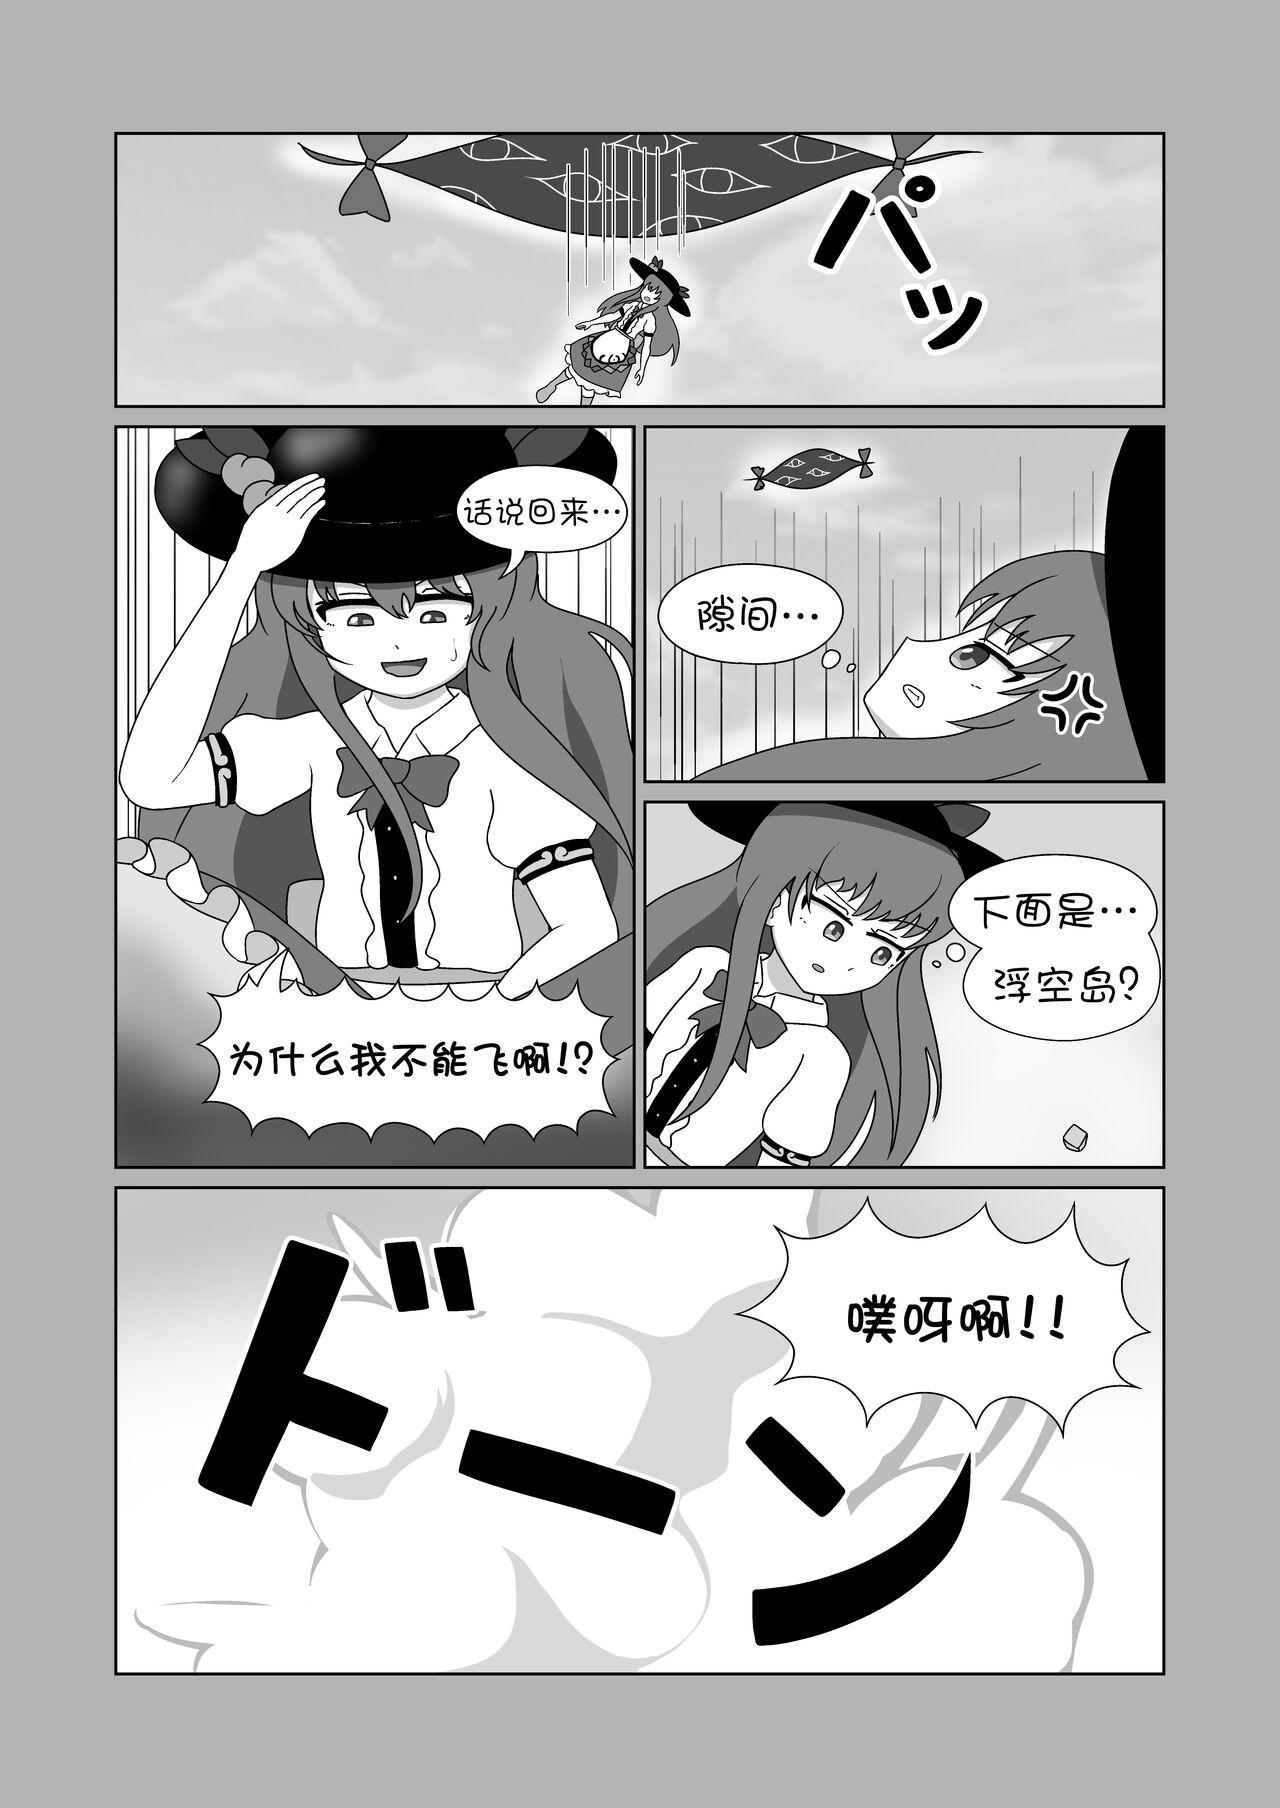 Tanned 天子 in BecomeFumo - Touhou project Coed - Page 4